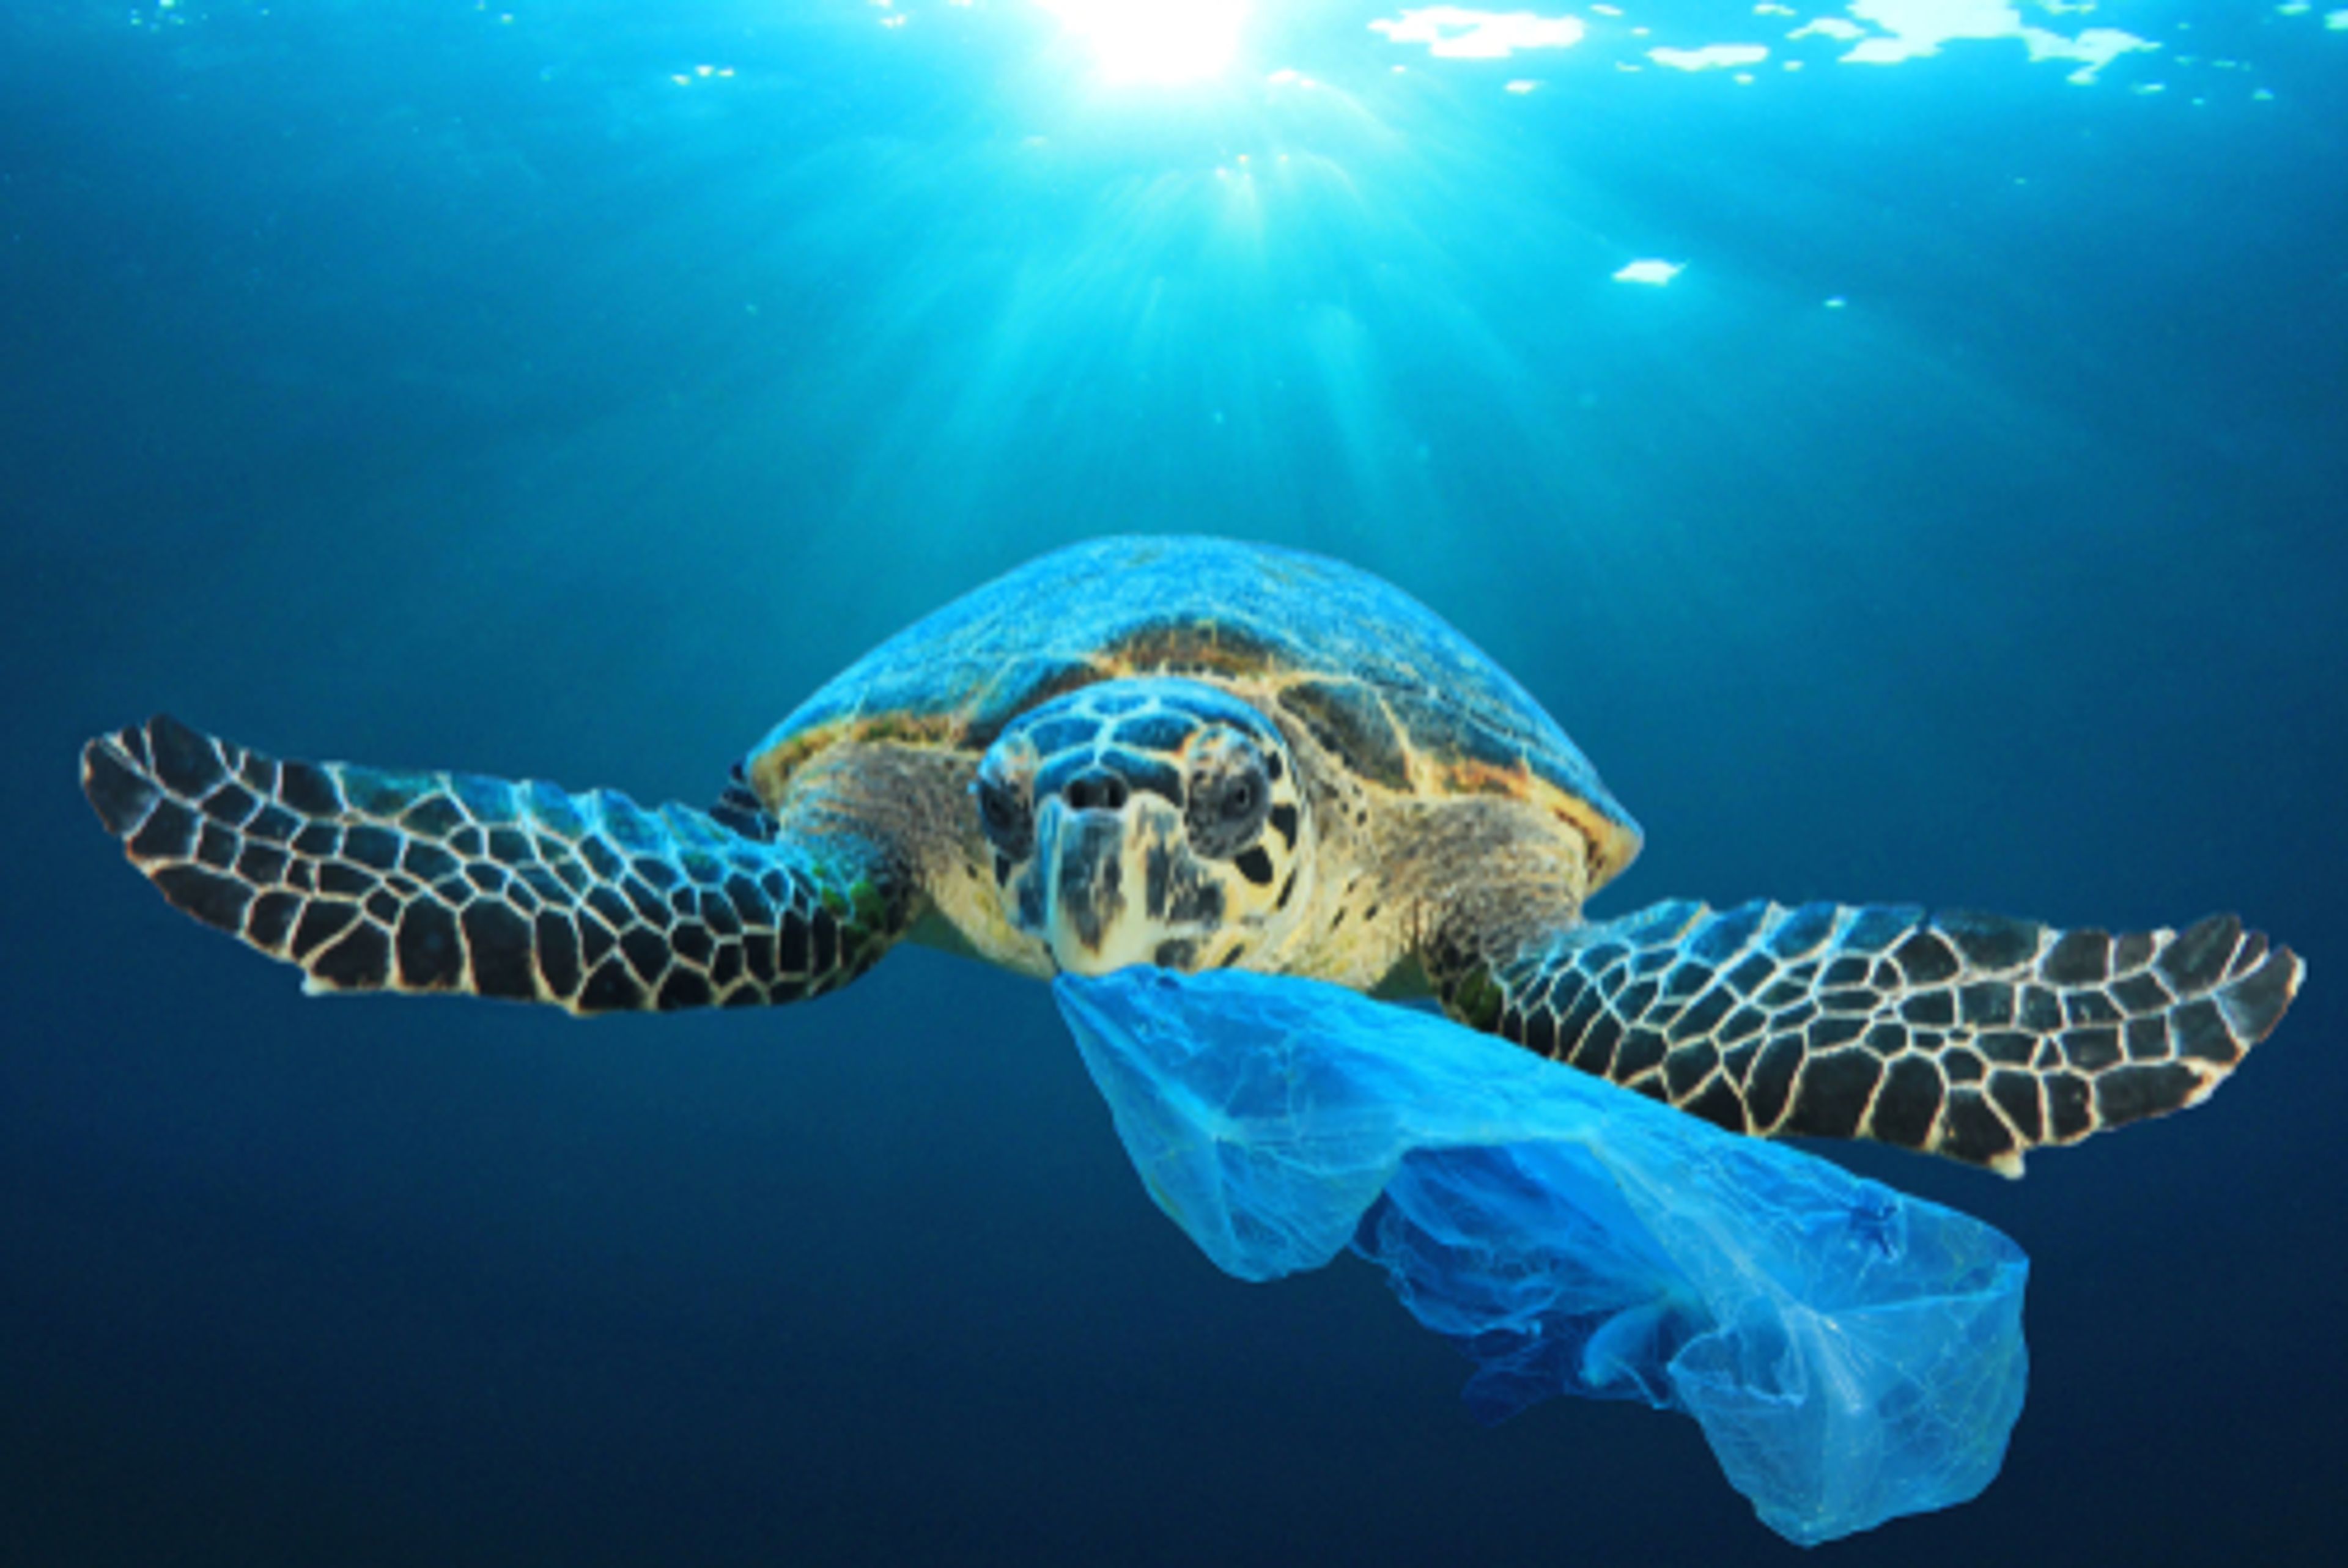 A photo of a turtle underwater with a plastic bag in it's mouth